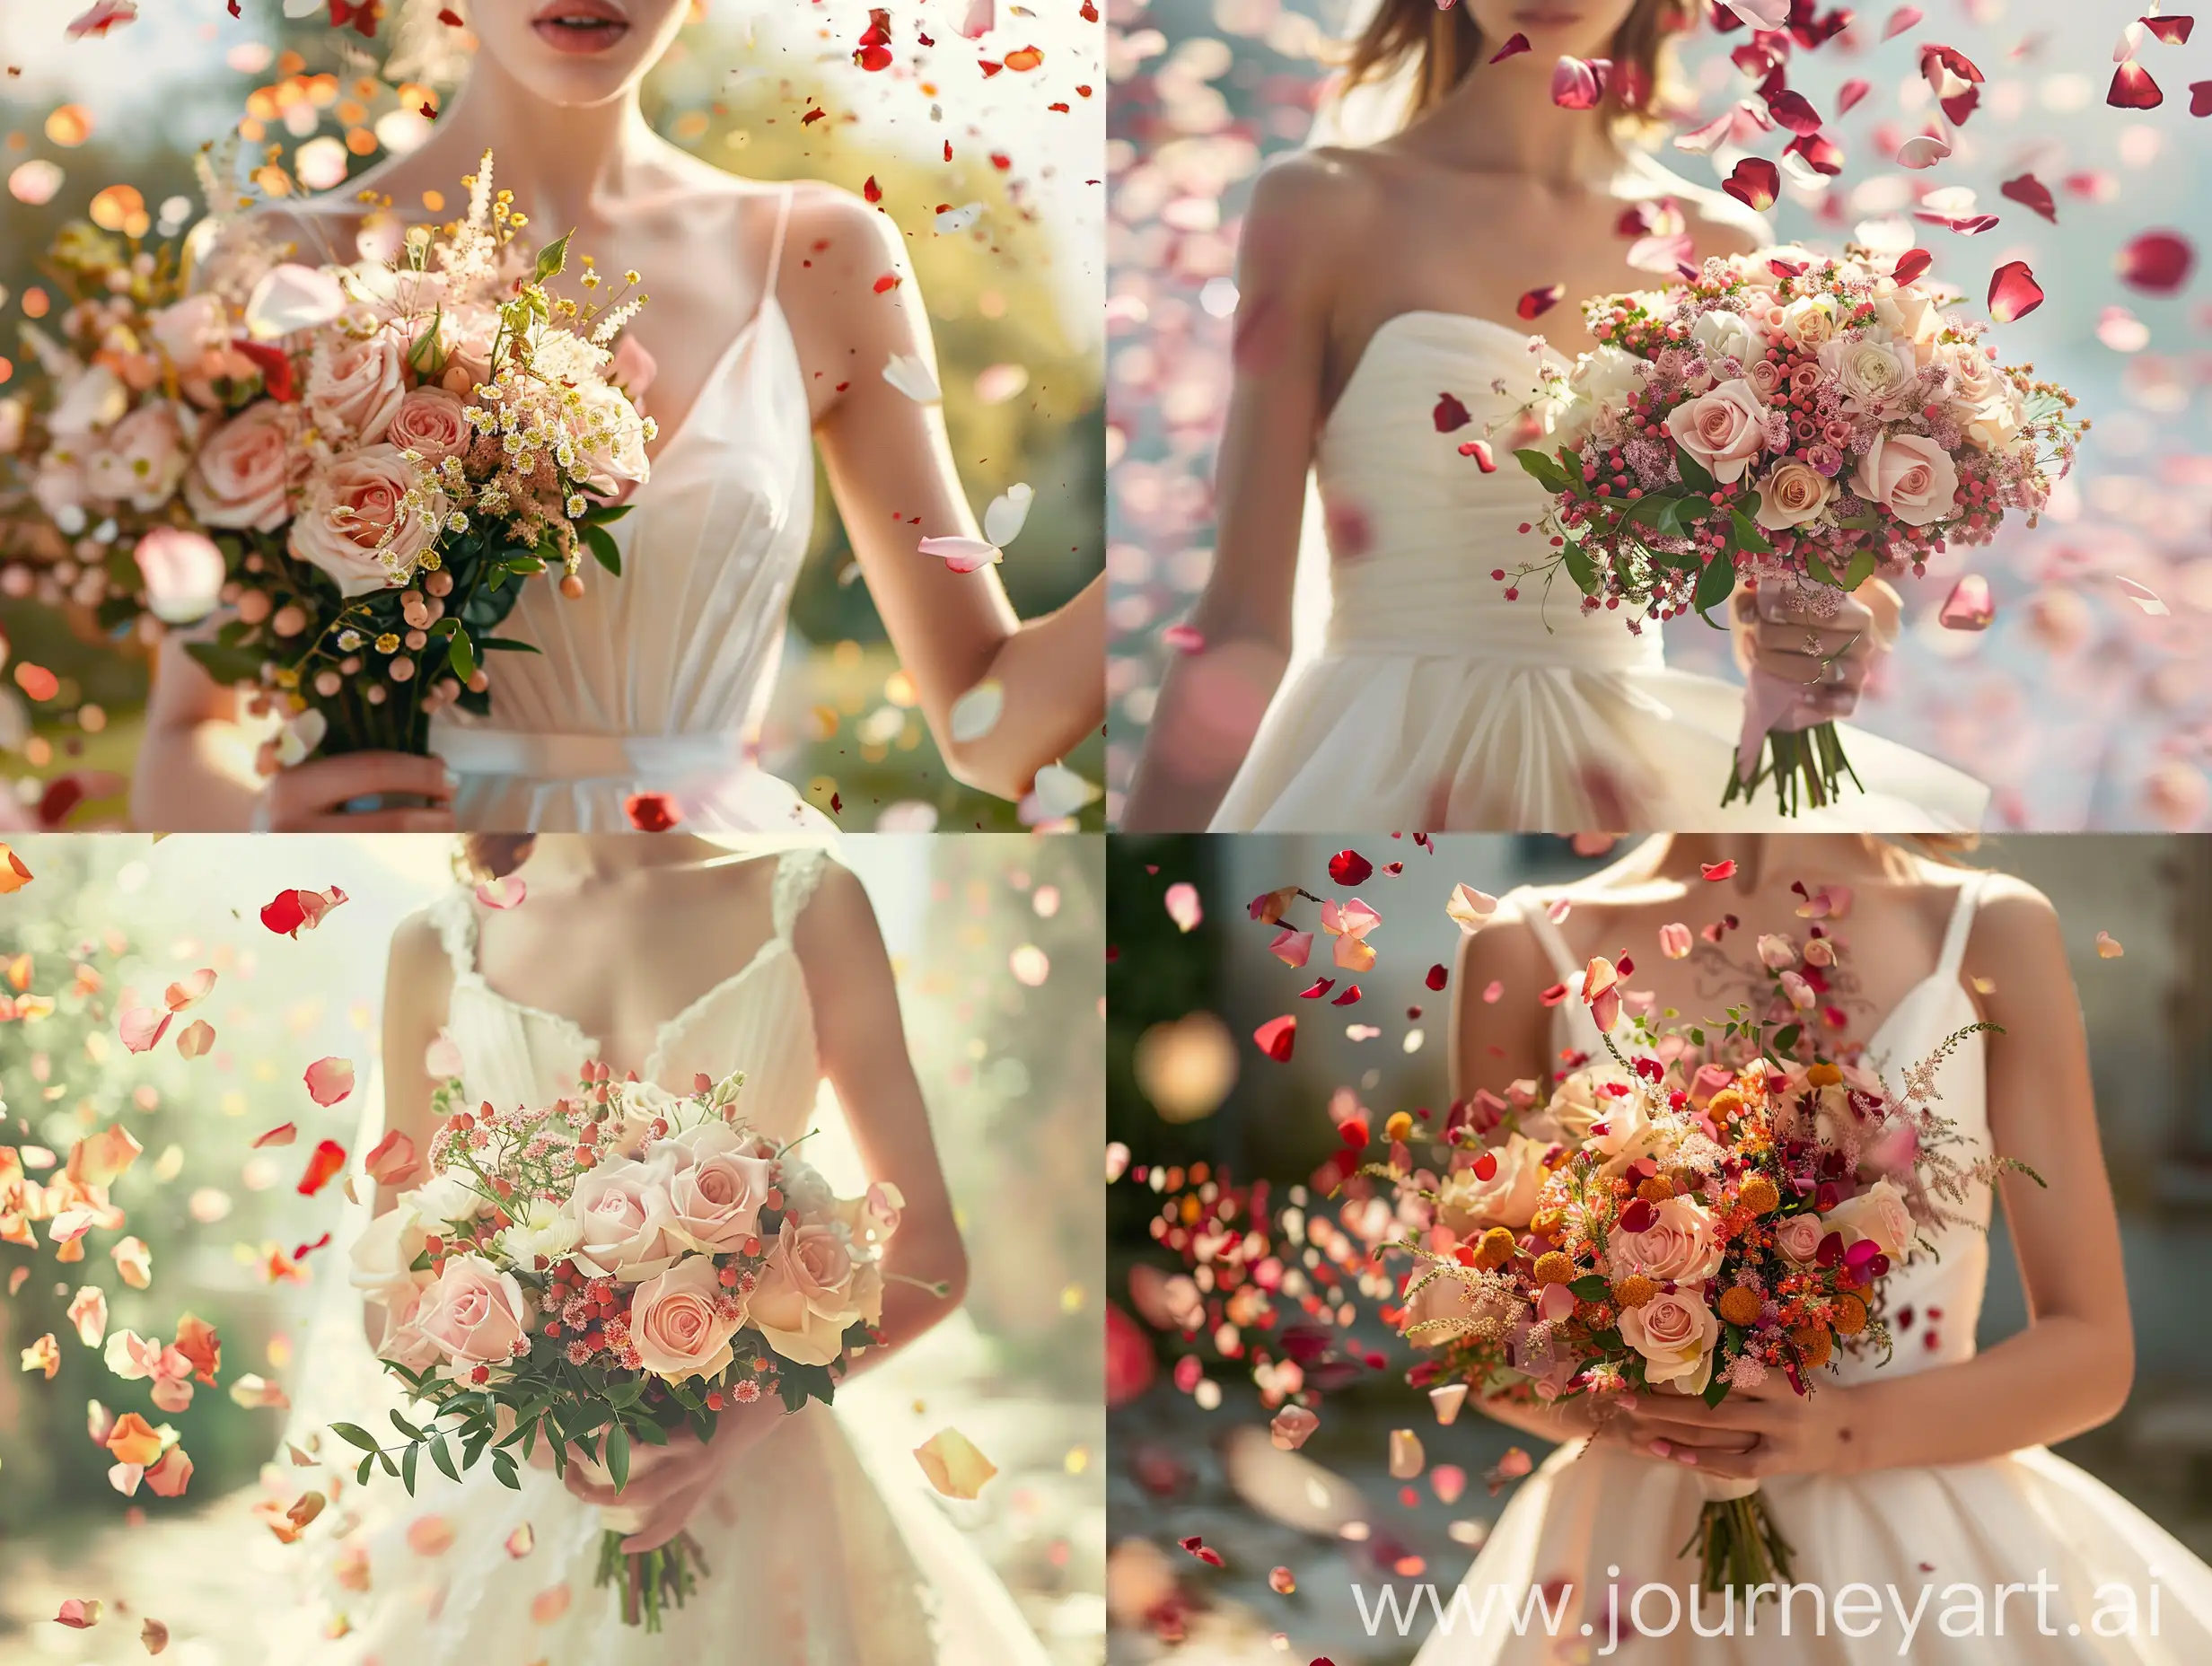 beautiful wedding bouquet of flowers, the bouquet is held by a young lady, rose petal confetti is flying from above, her hand is not visible, she has a white dress with a strong neckline, very small depth of field, high quality, photorealistic quality, sunshine, summer, Italian climate, strong close-up , you can see only flowers and a dress in the background, no hands, lots of rose petals falling down the top